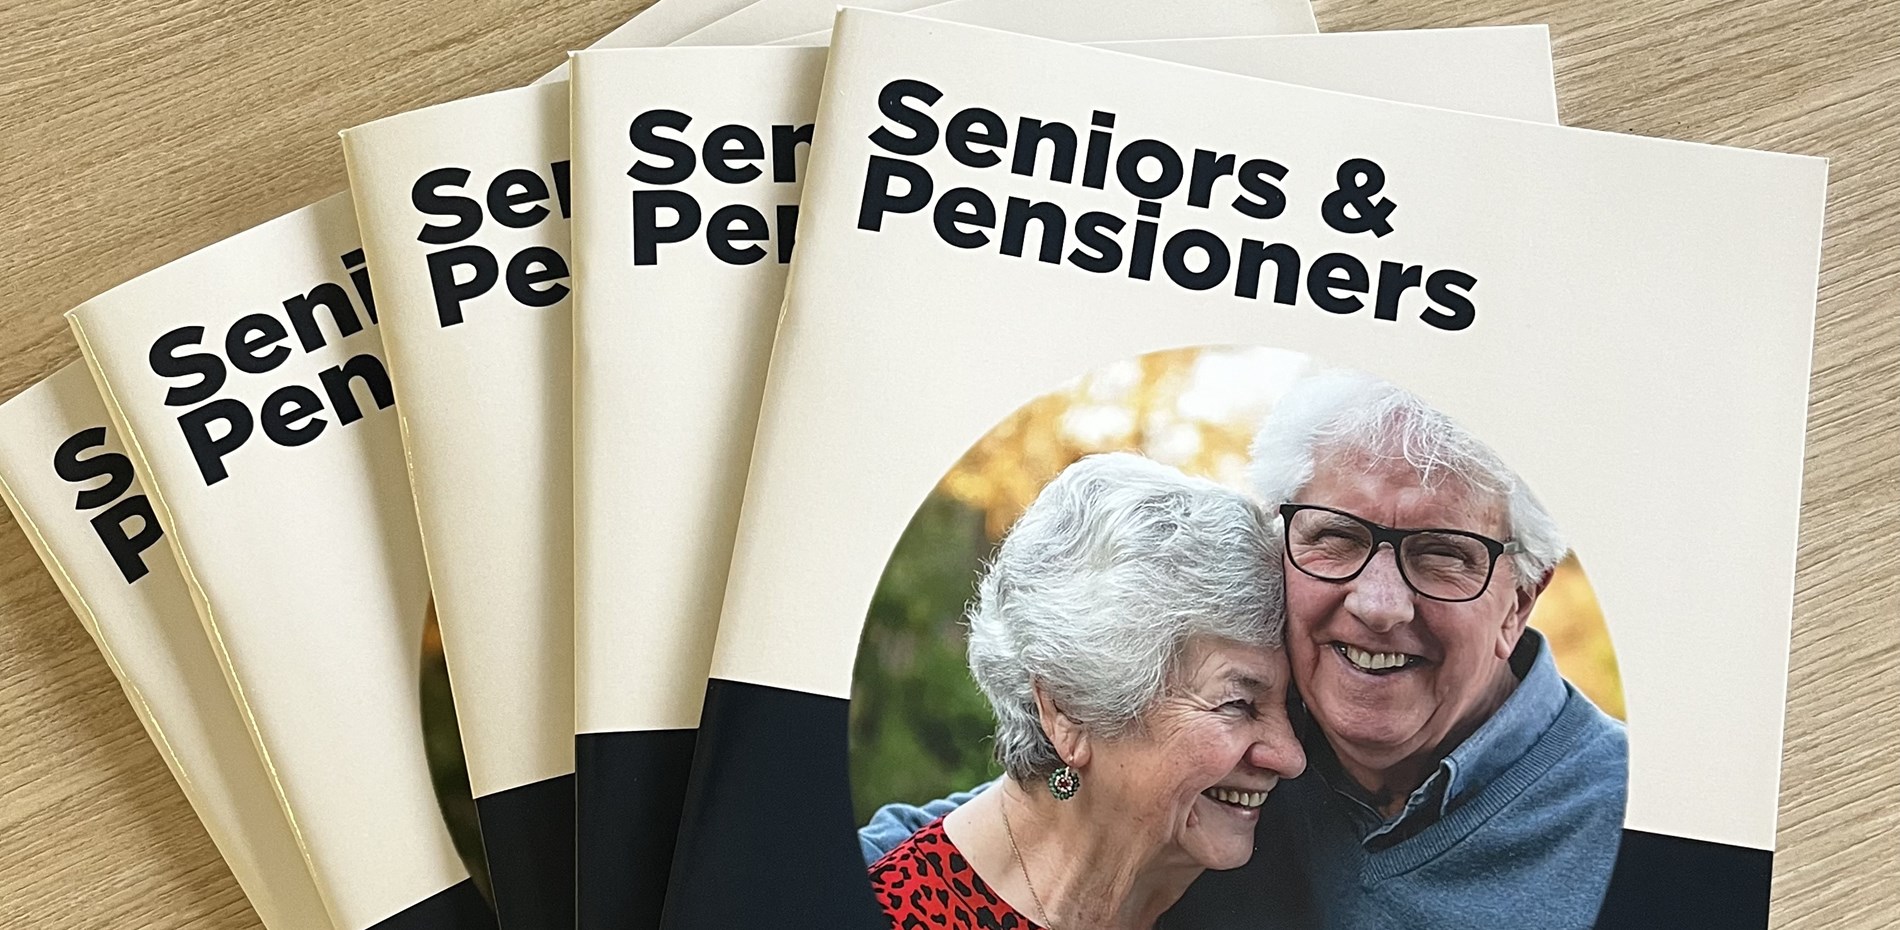 Pensioners' and Seniors' Booklet Main Image